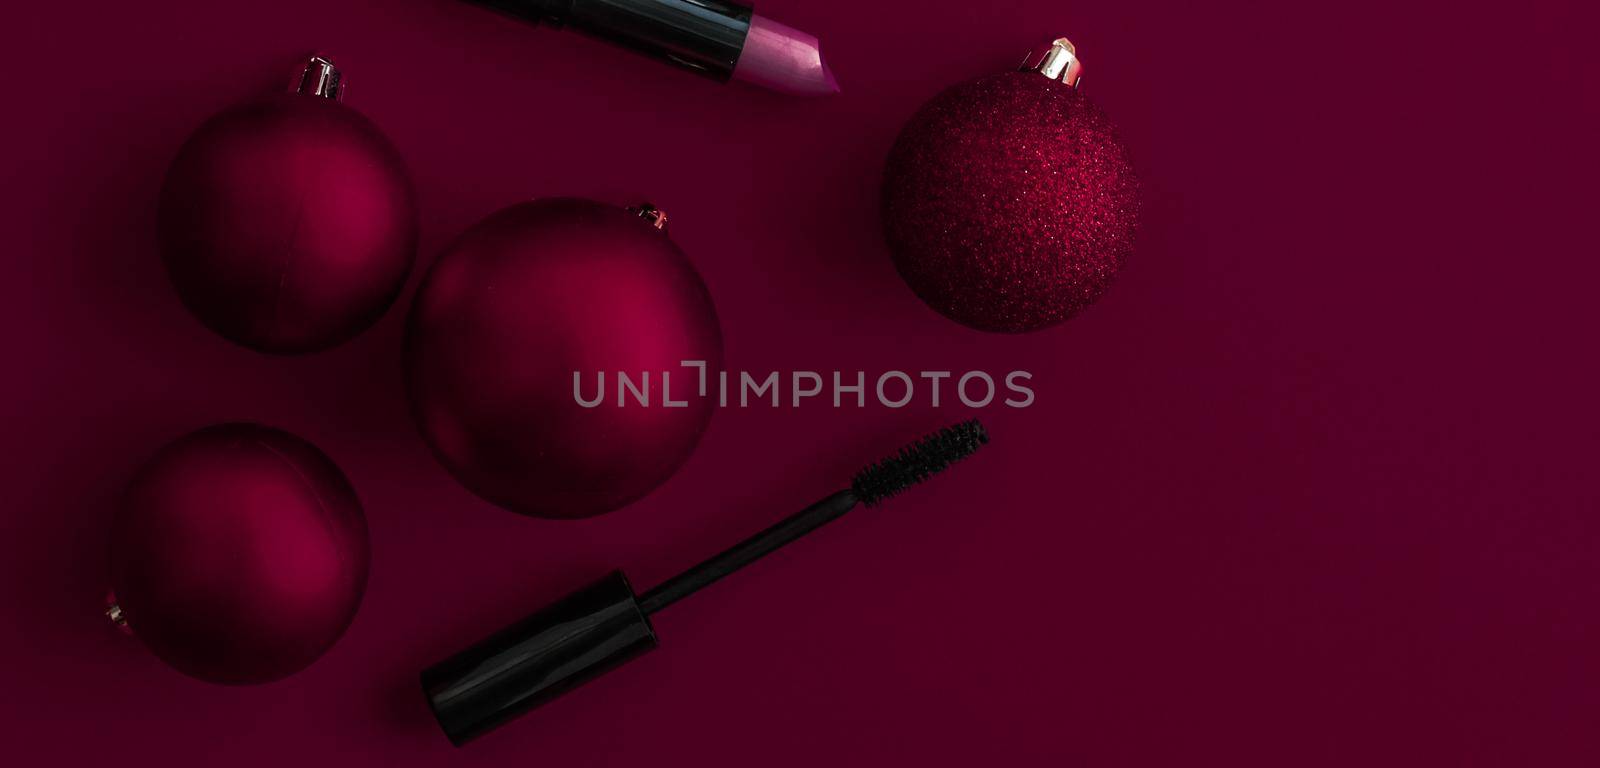 Make-up and cosmetics product set for beauty brand Christmas sale promotion, luxury burgundy flatlay background as holiday design by Anneleven